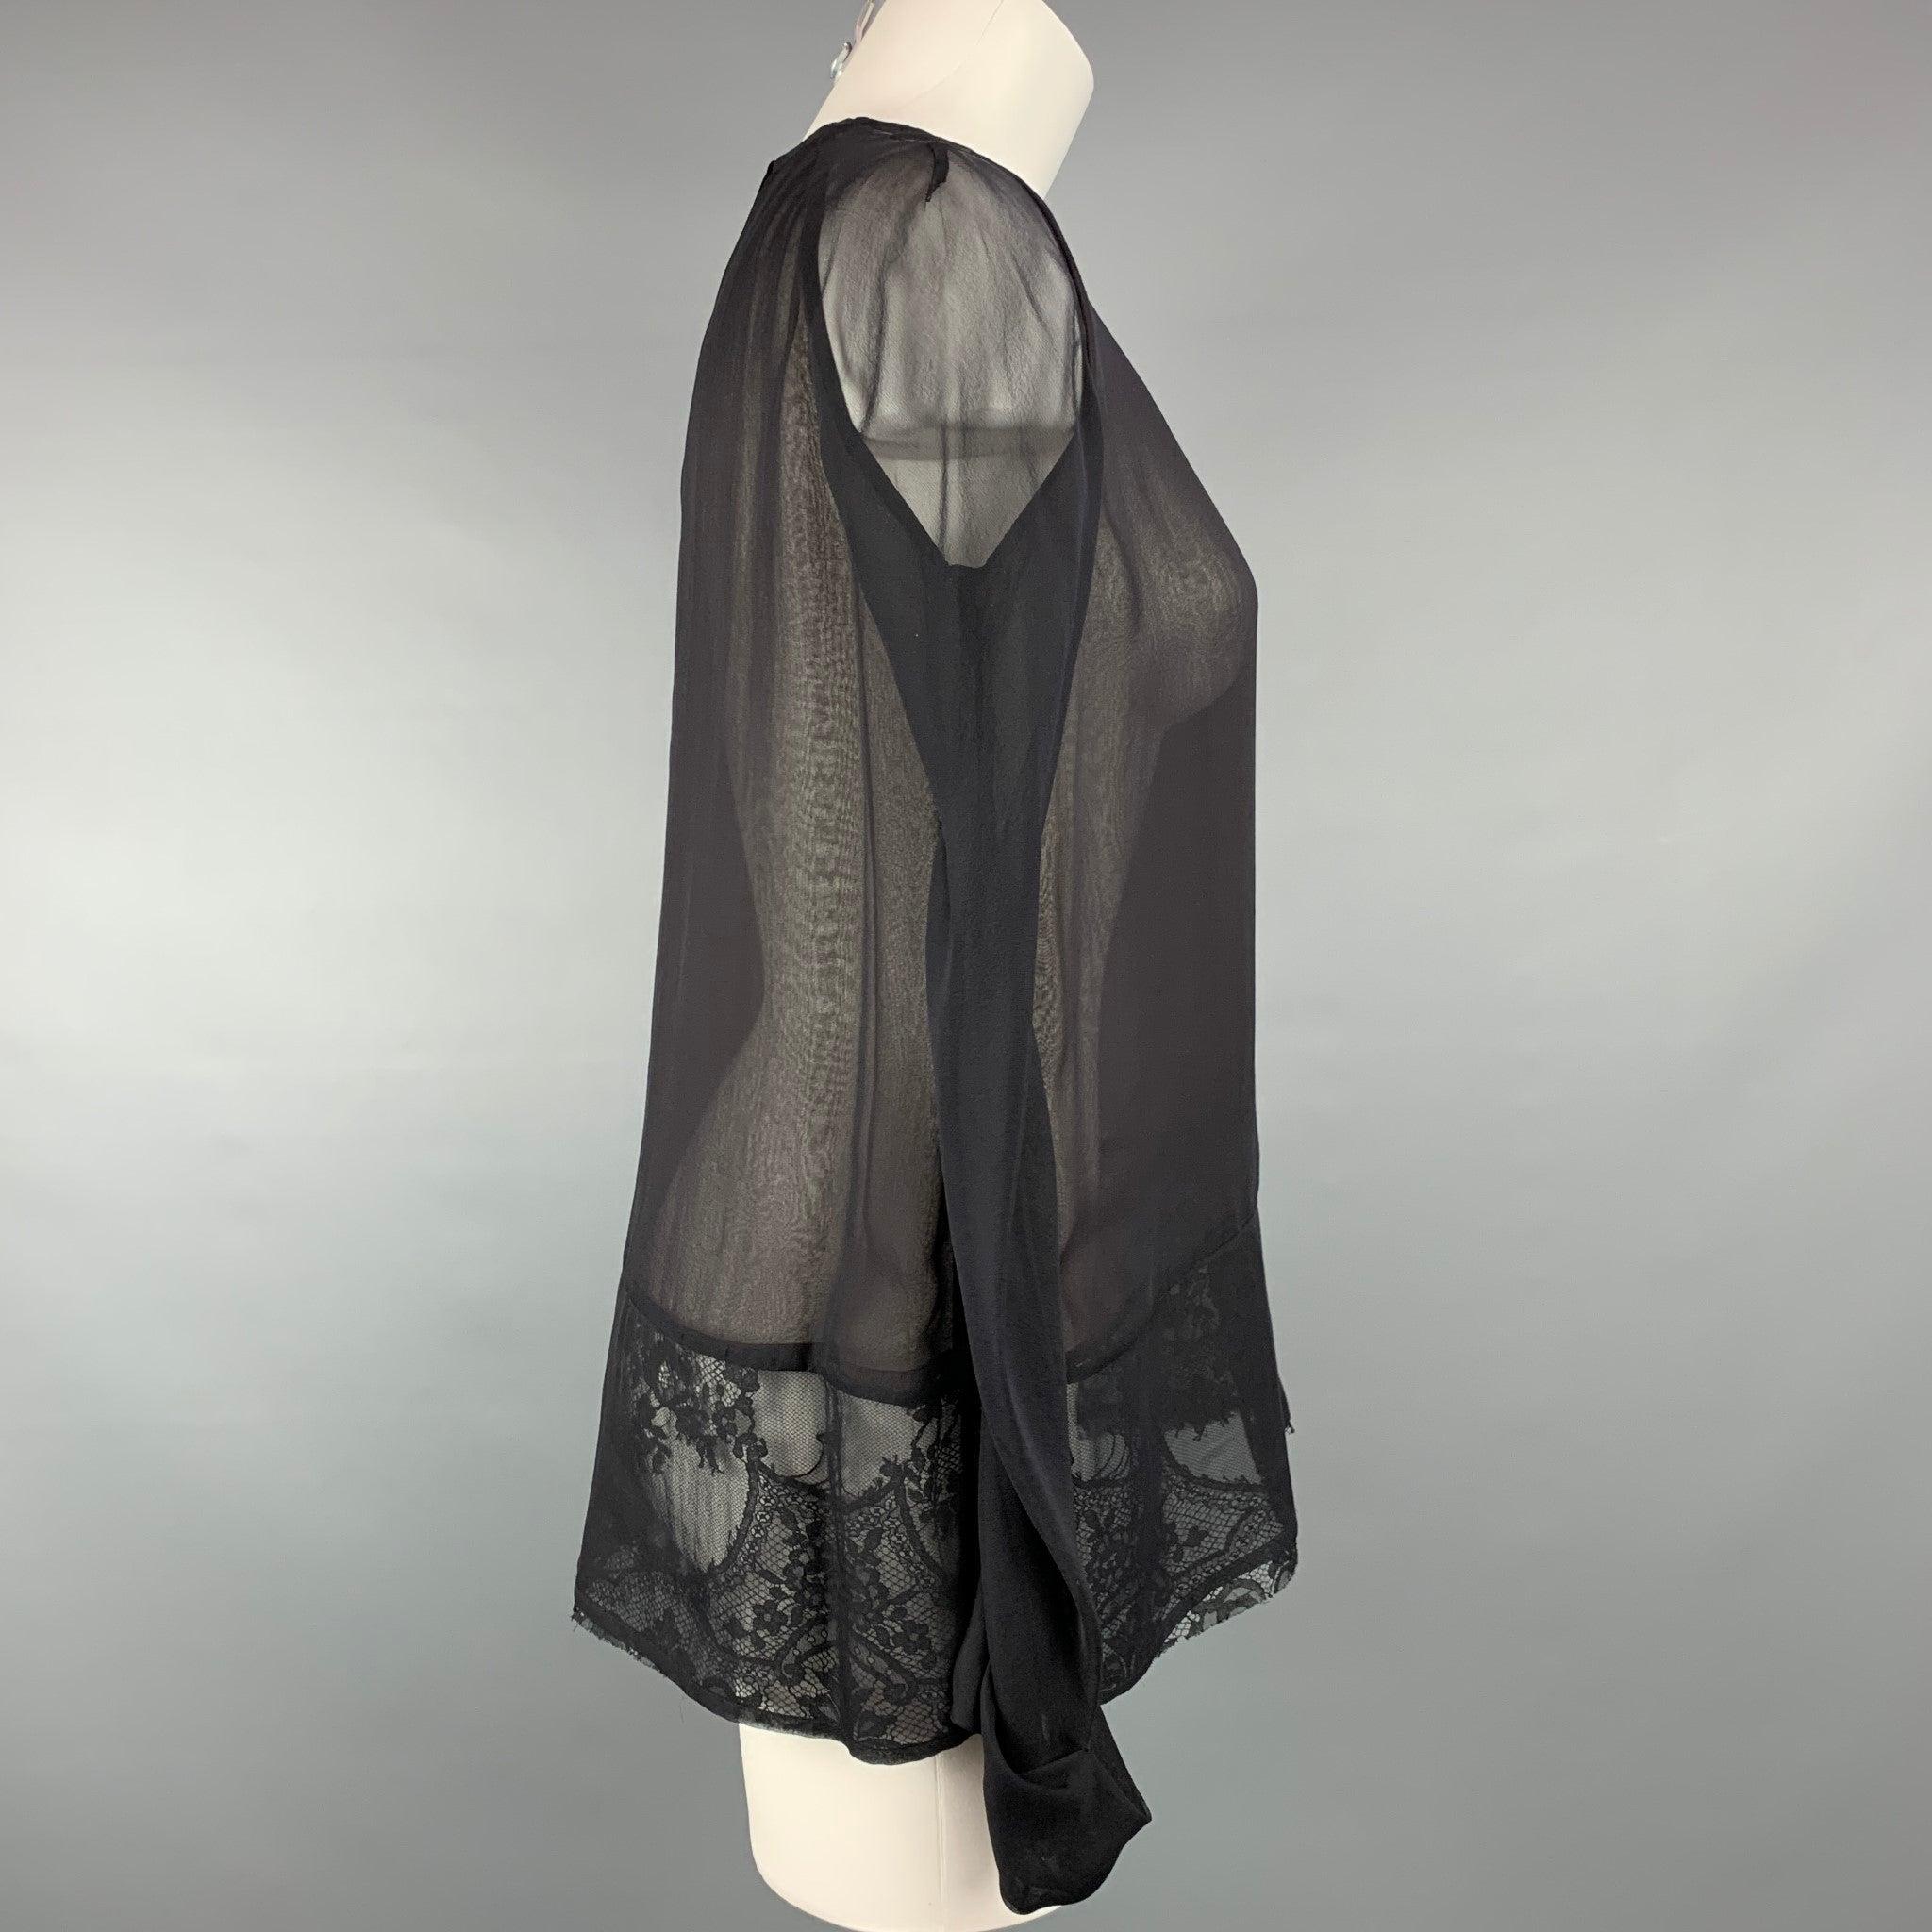 HAIDER ACKERMANN blouse comes in a black & brown silk with a lace panel folded cuffs and a hook & loop closure. Made in Portugal.
Very Good
Pre-Owned Condition. 

Marked:   40 

Measurements: 
 
Shoulder:
17 inches  Bust: 40 inches  Sleeve: 26